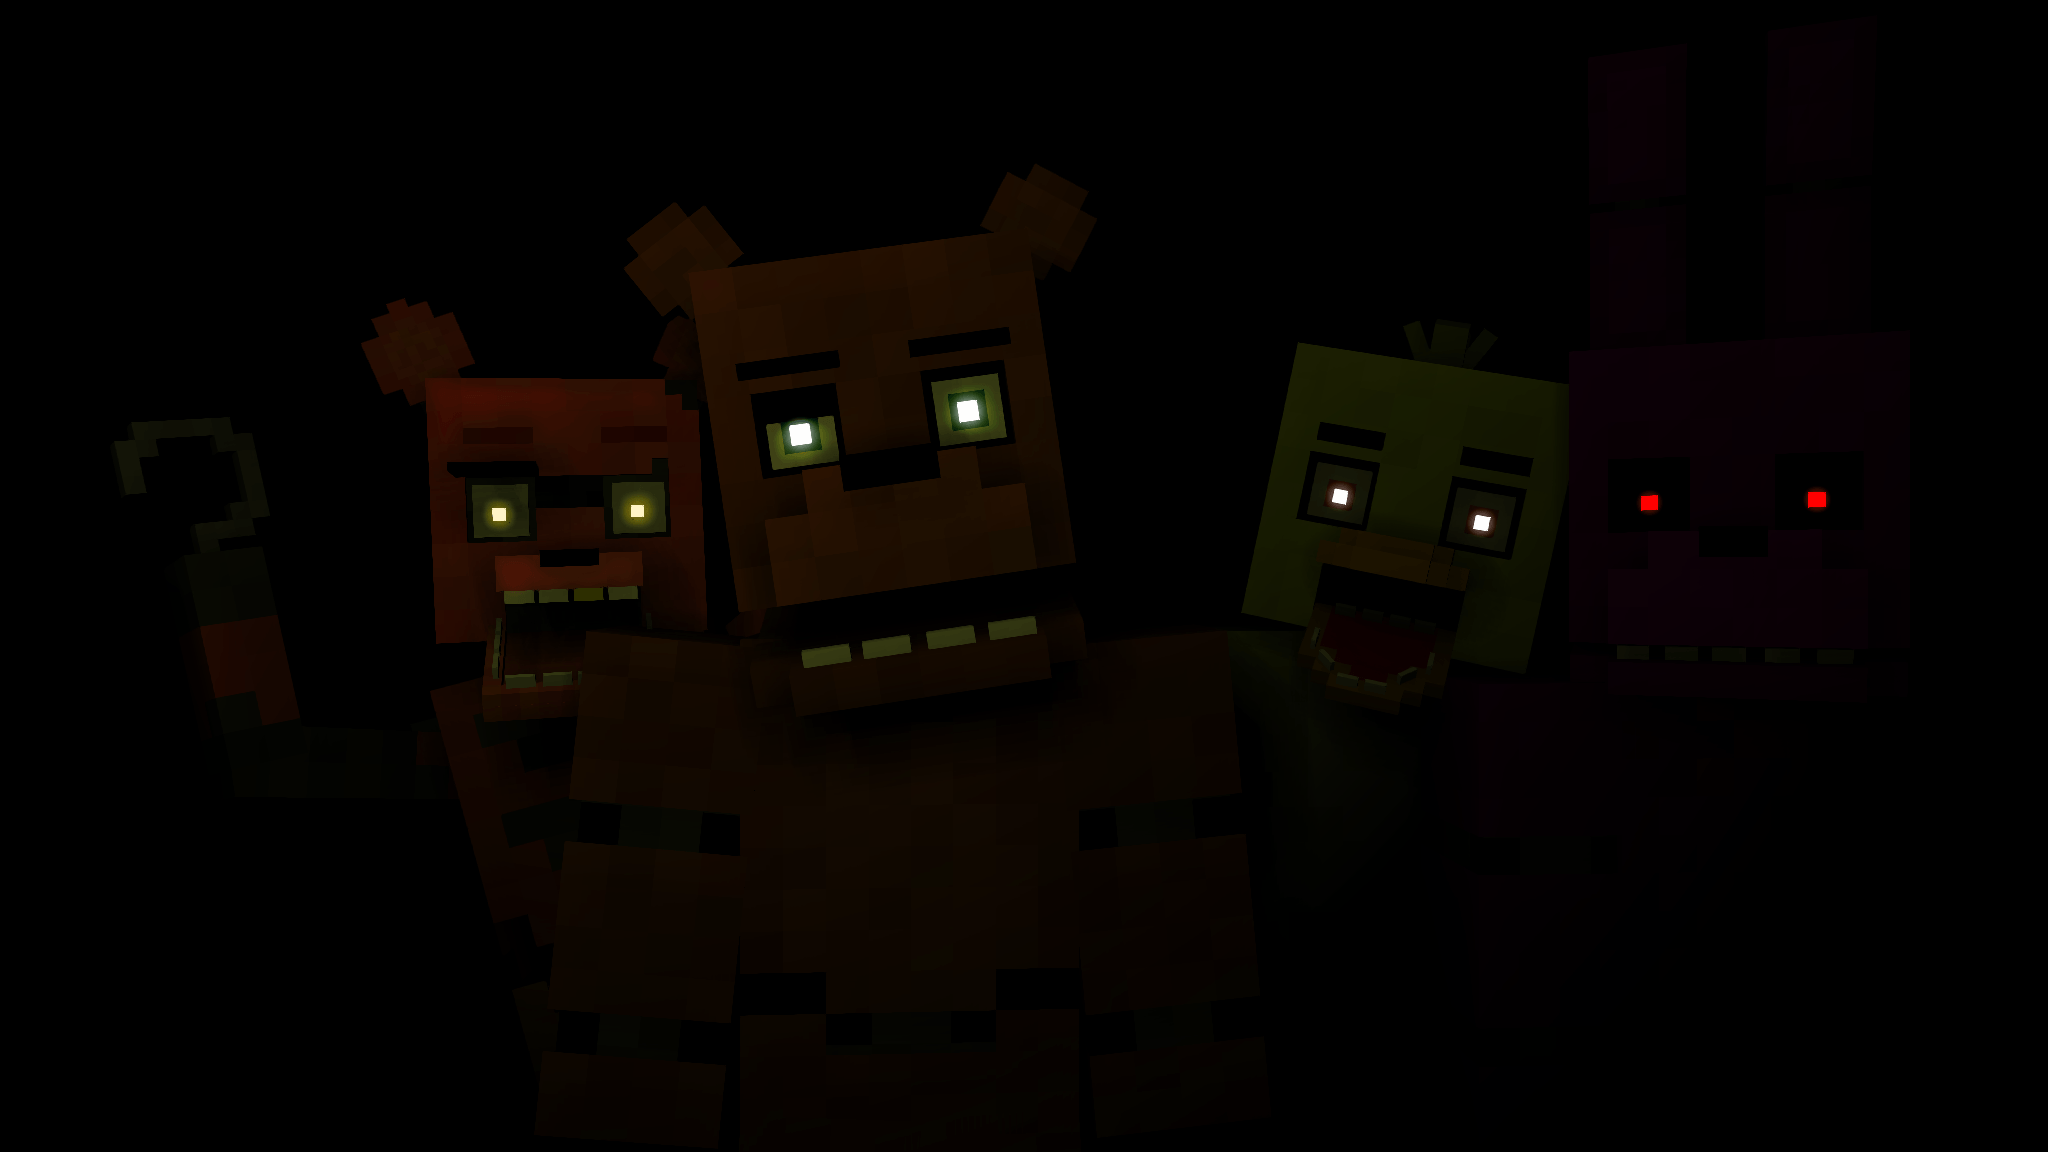 Mike's band and Fredbear's band [2k] and art